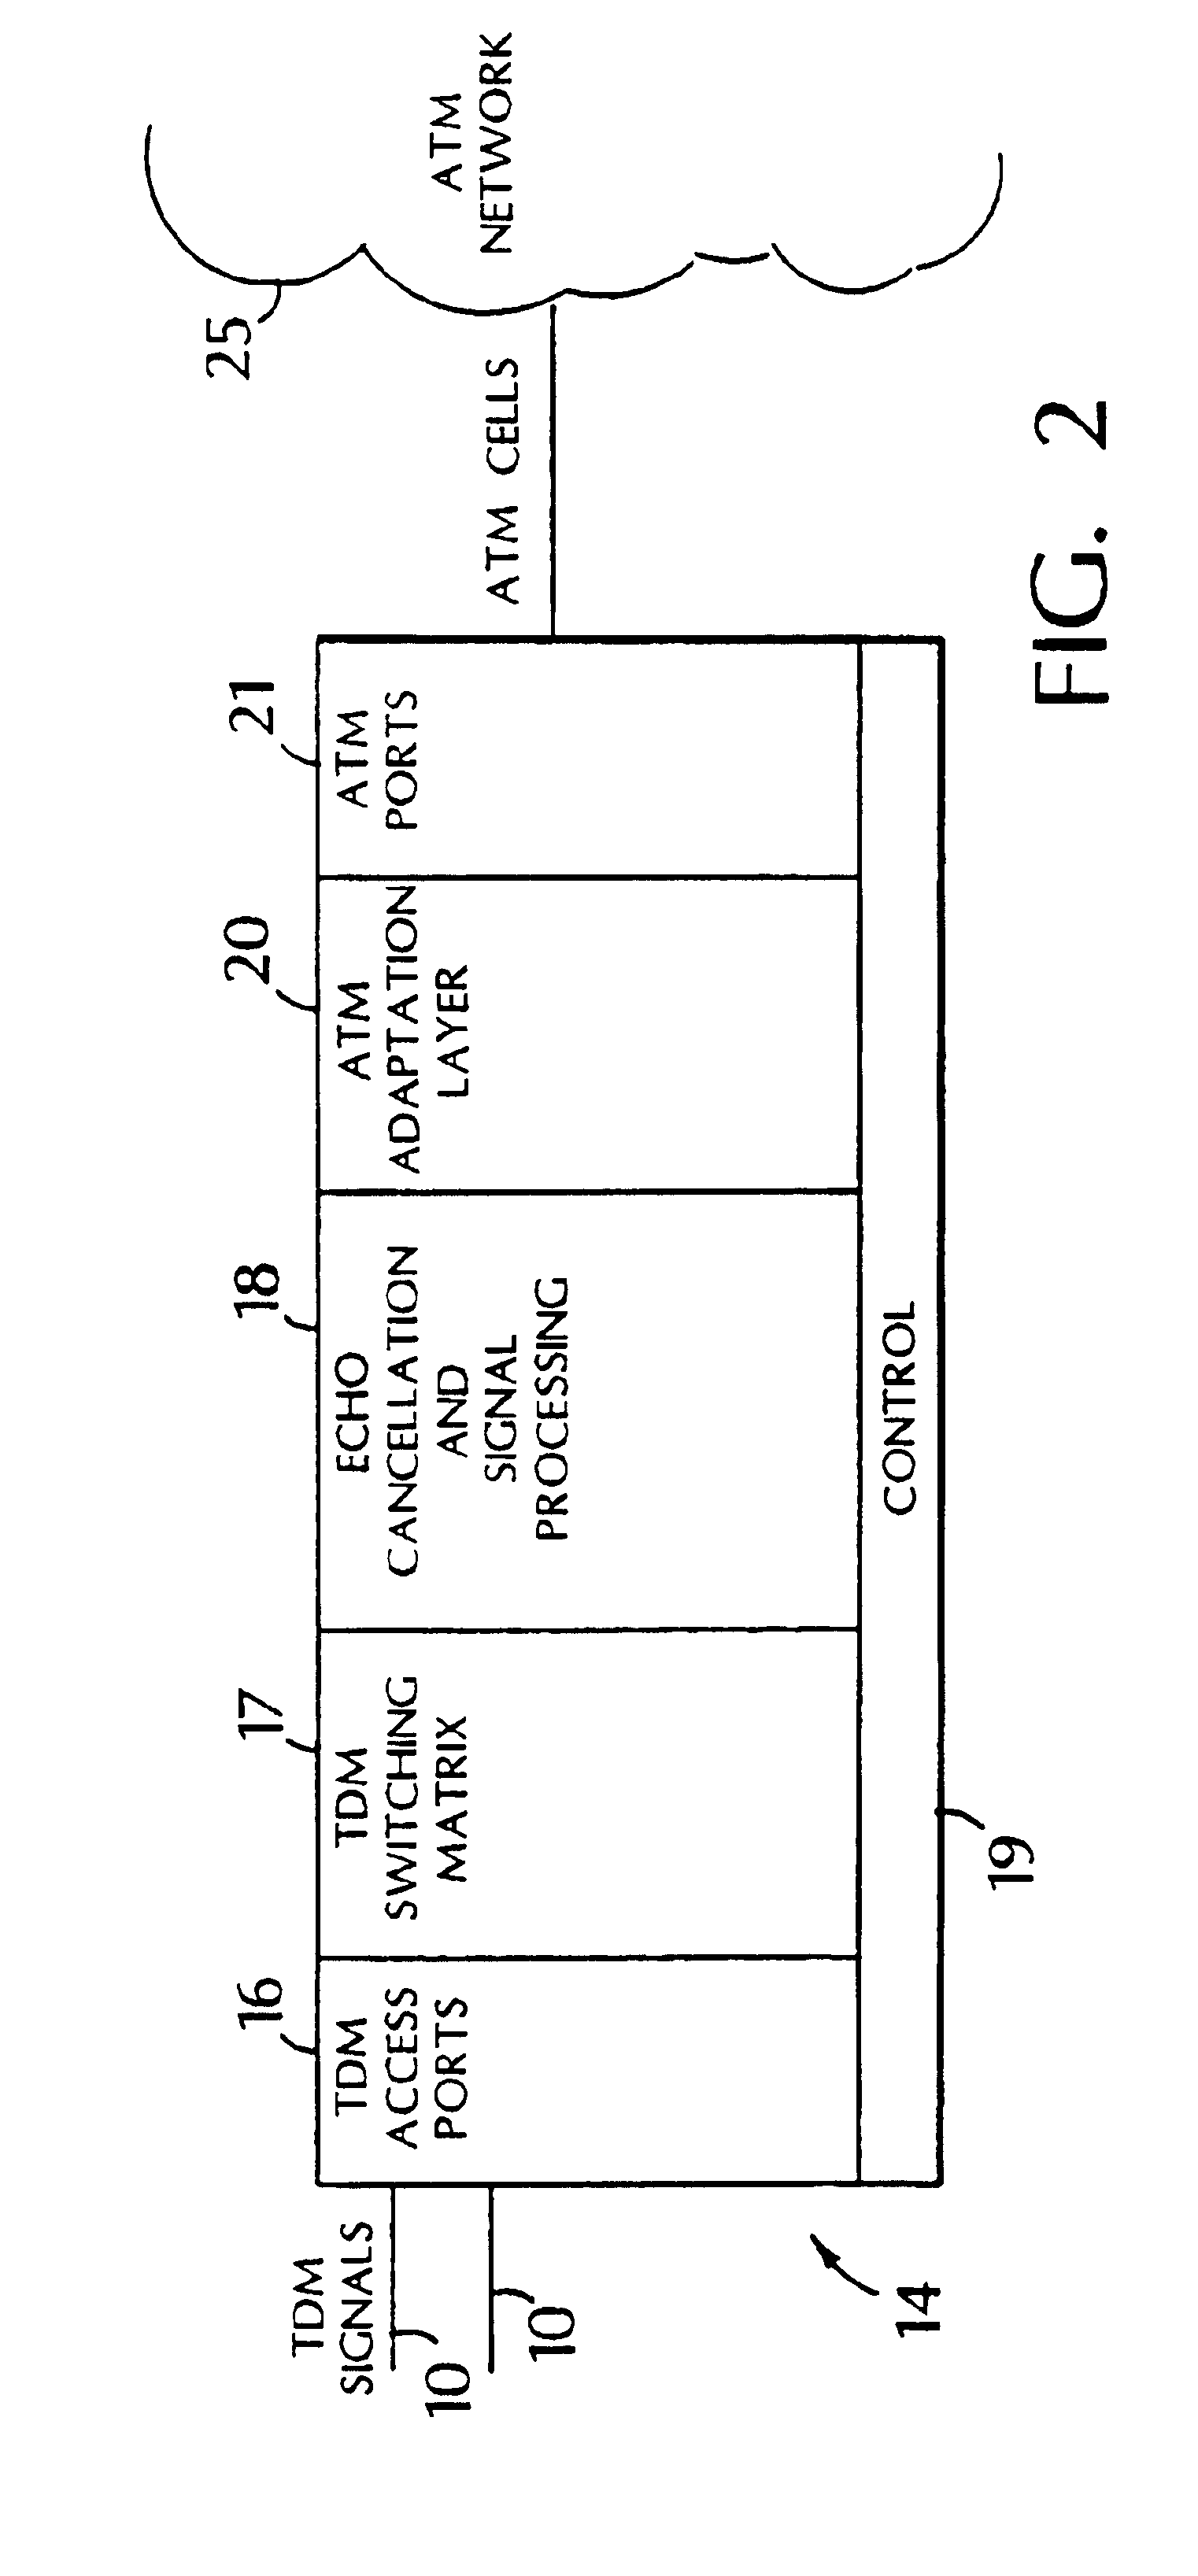 Private lines traversing a packet network and re-arrangement of channels among packet network connections